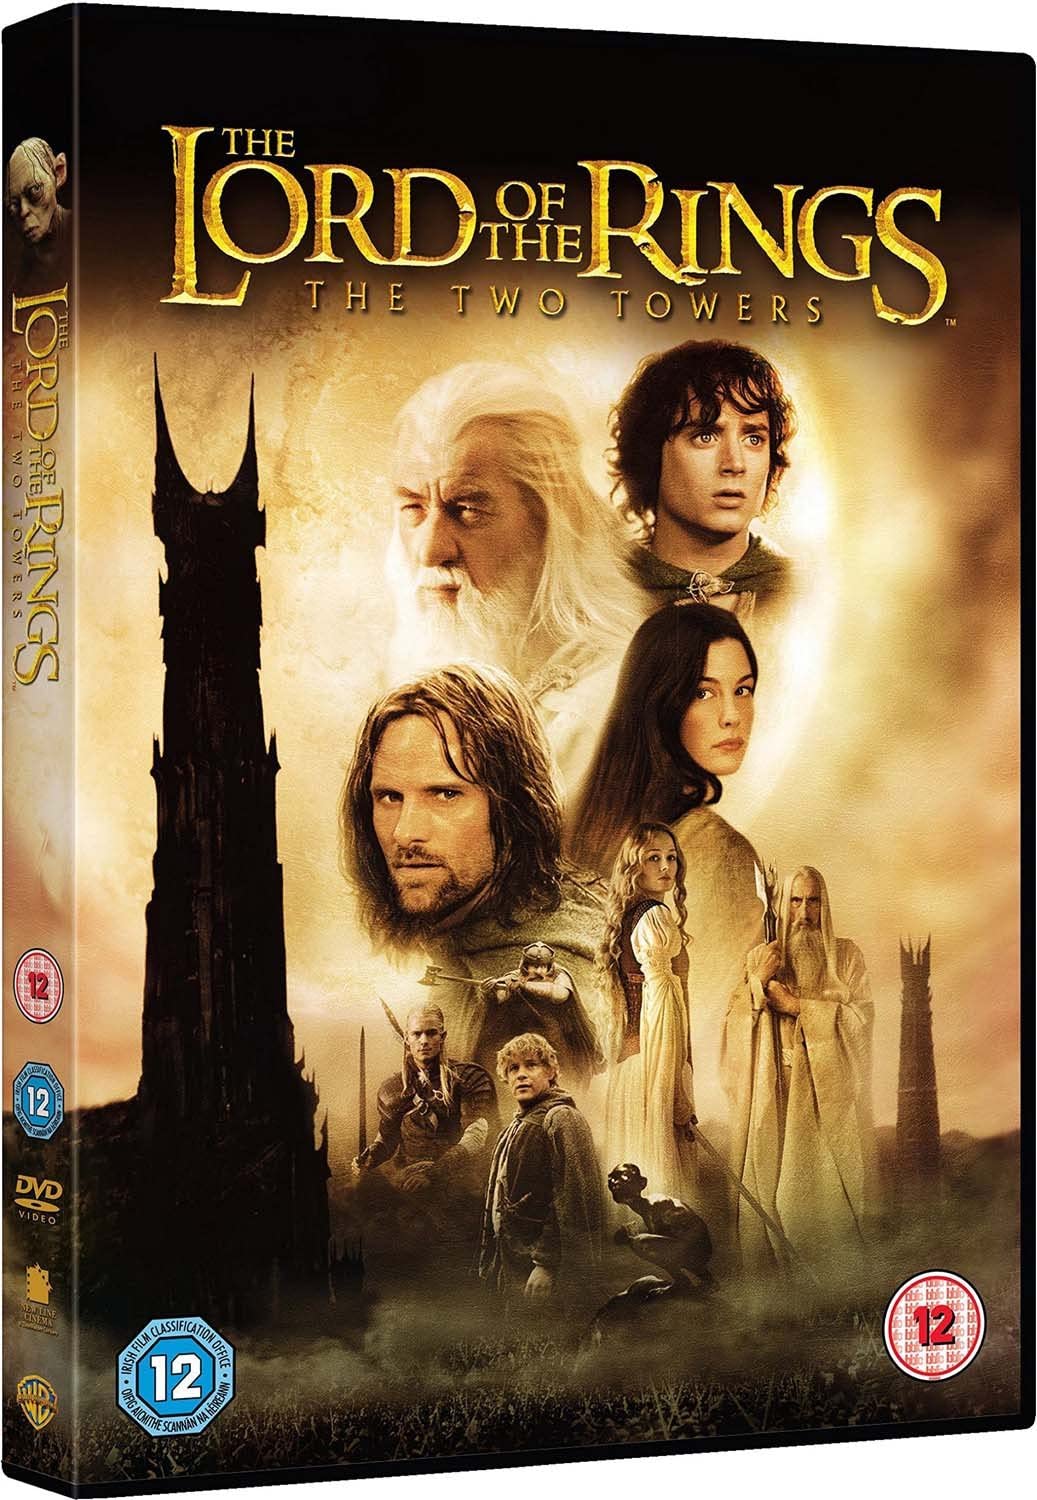 The Lord Of The Rings: The Two Towers [2002] - Fantasy/Adventure [DVD]